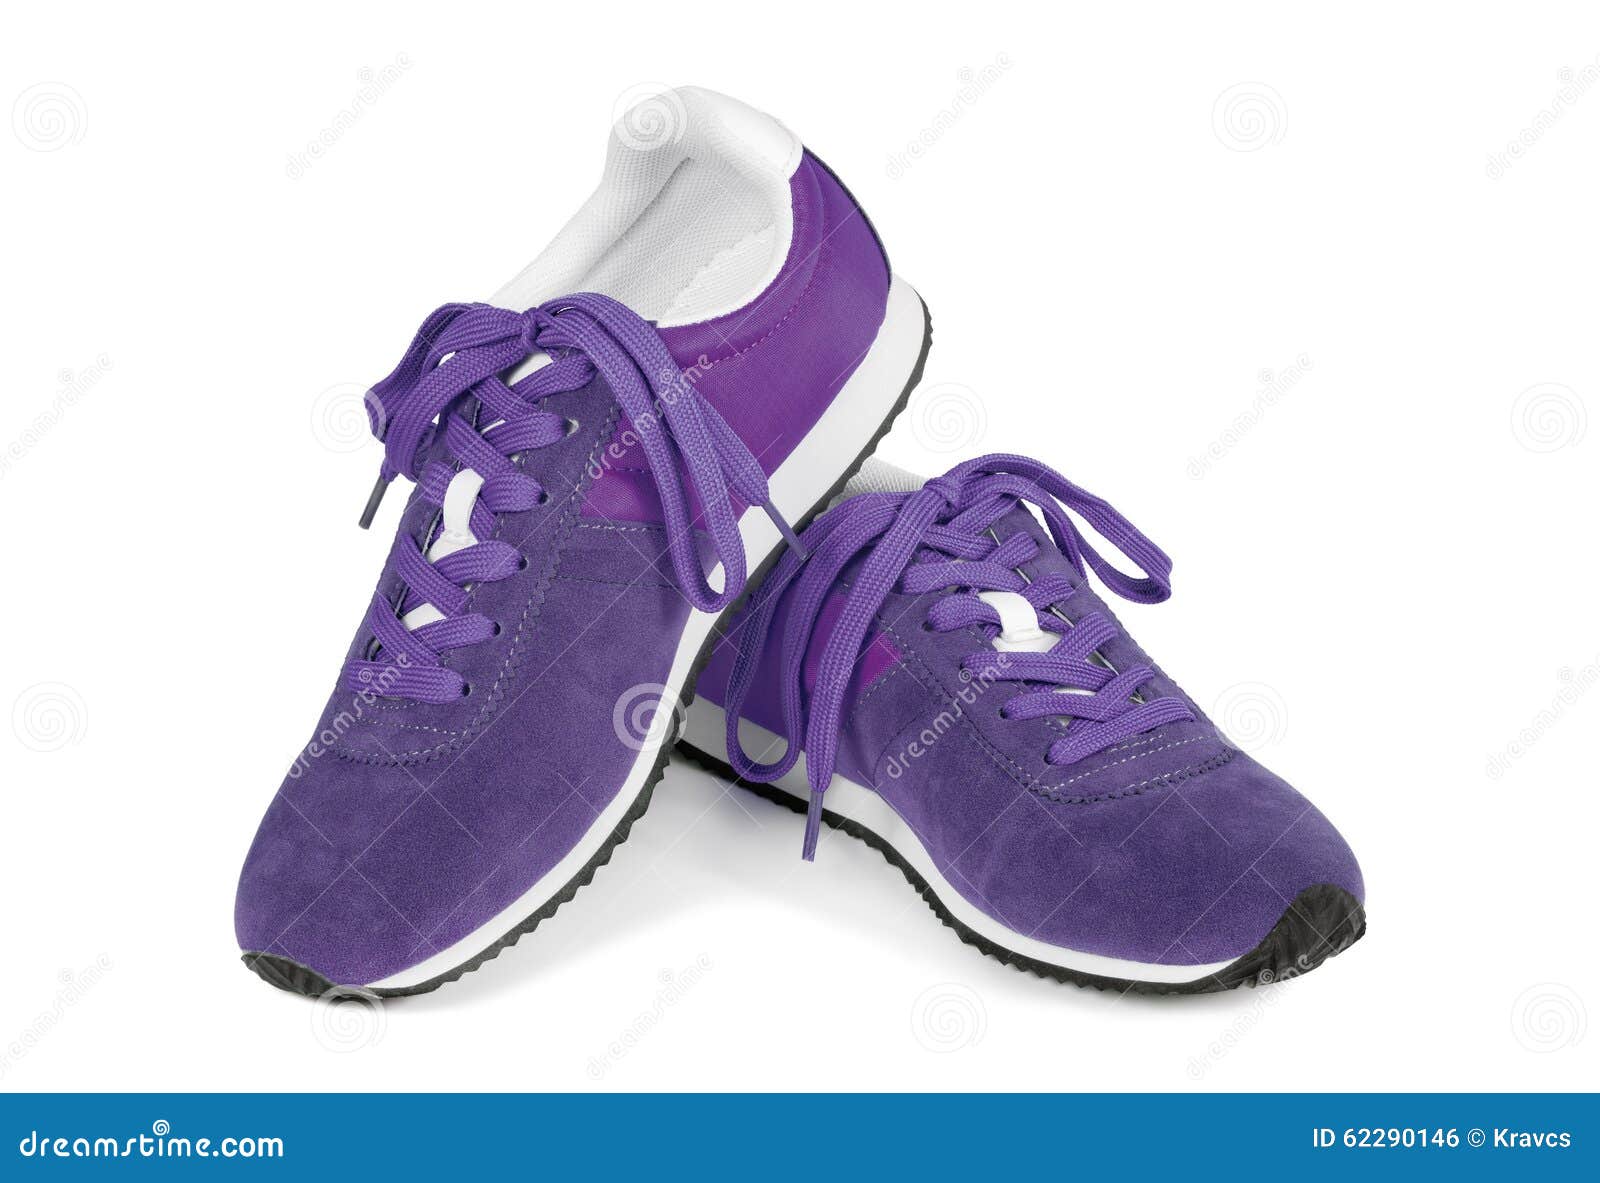 Running shoes isolated stock photo. Image of shoes, pair - 62290146